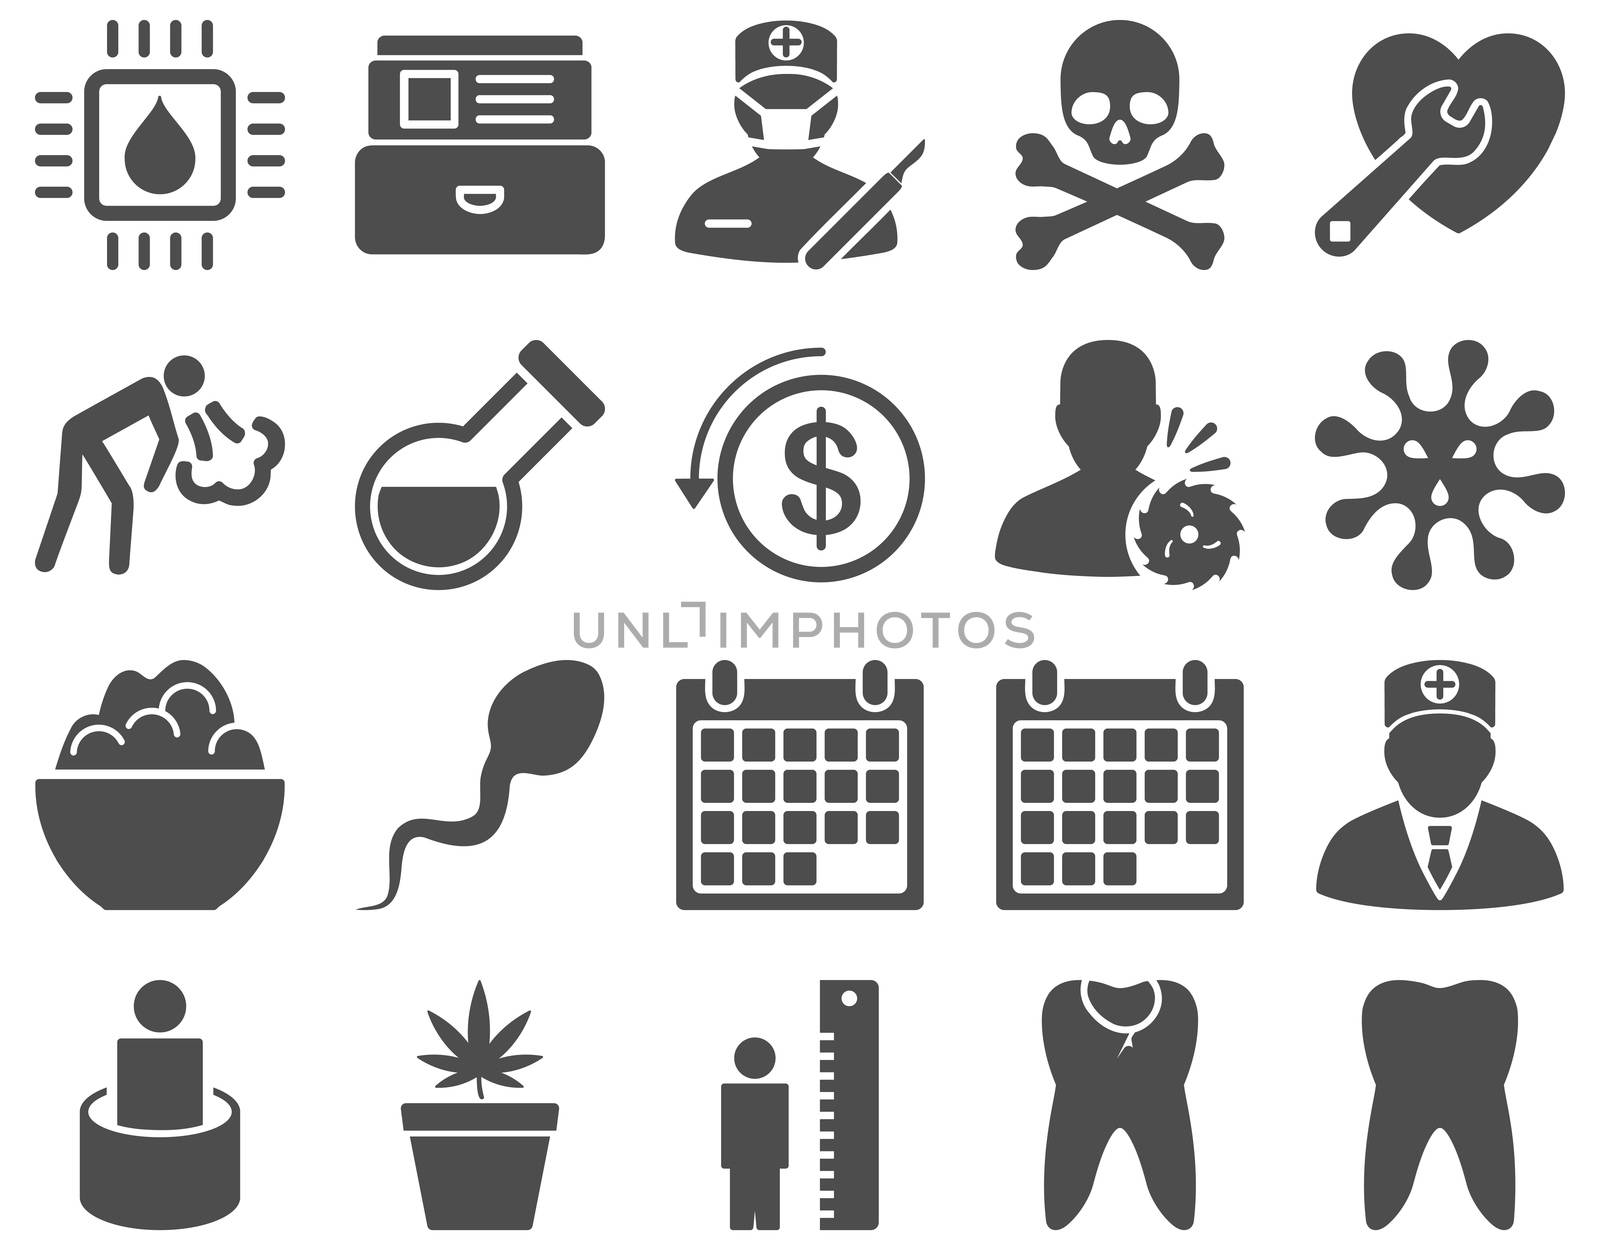 Medical icon set. Style: icons drawn with gray color on a white background.